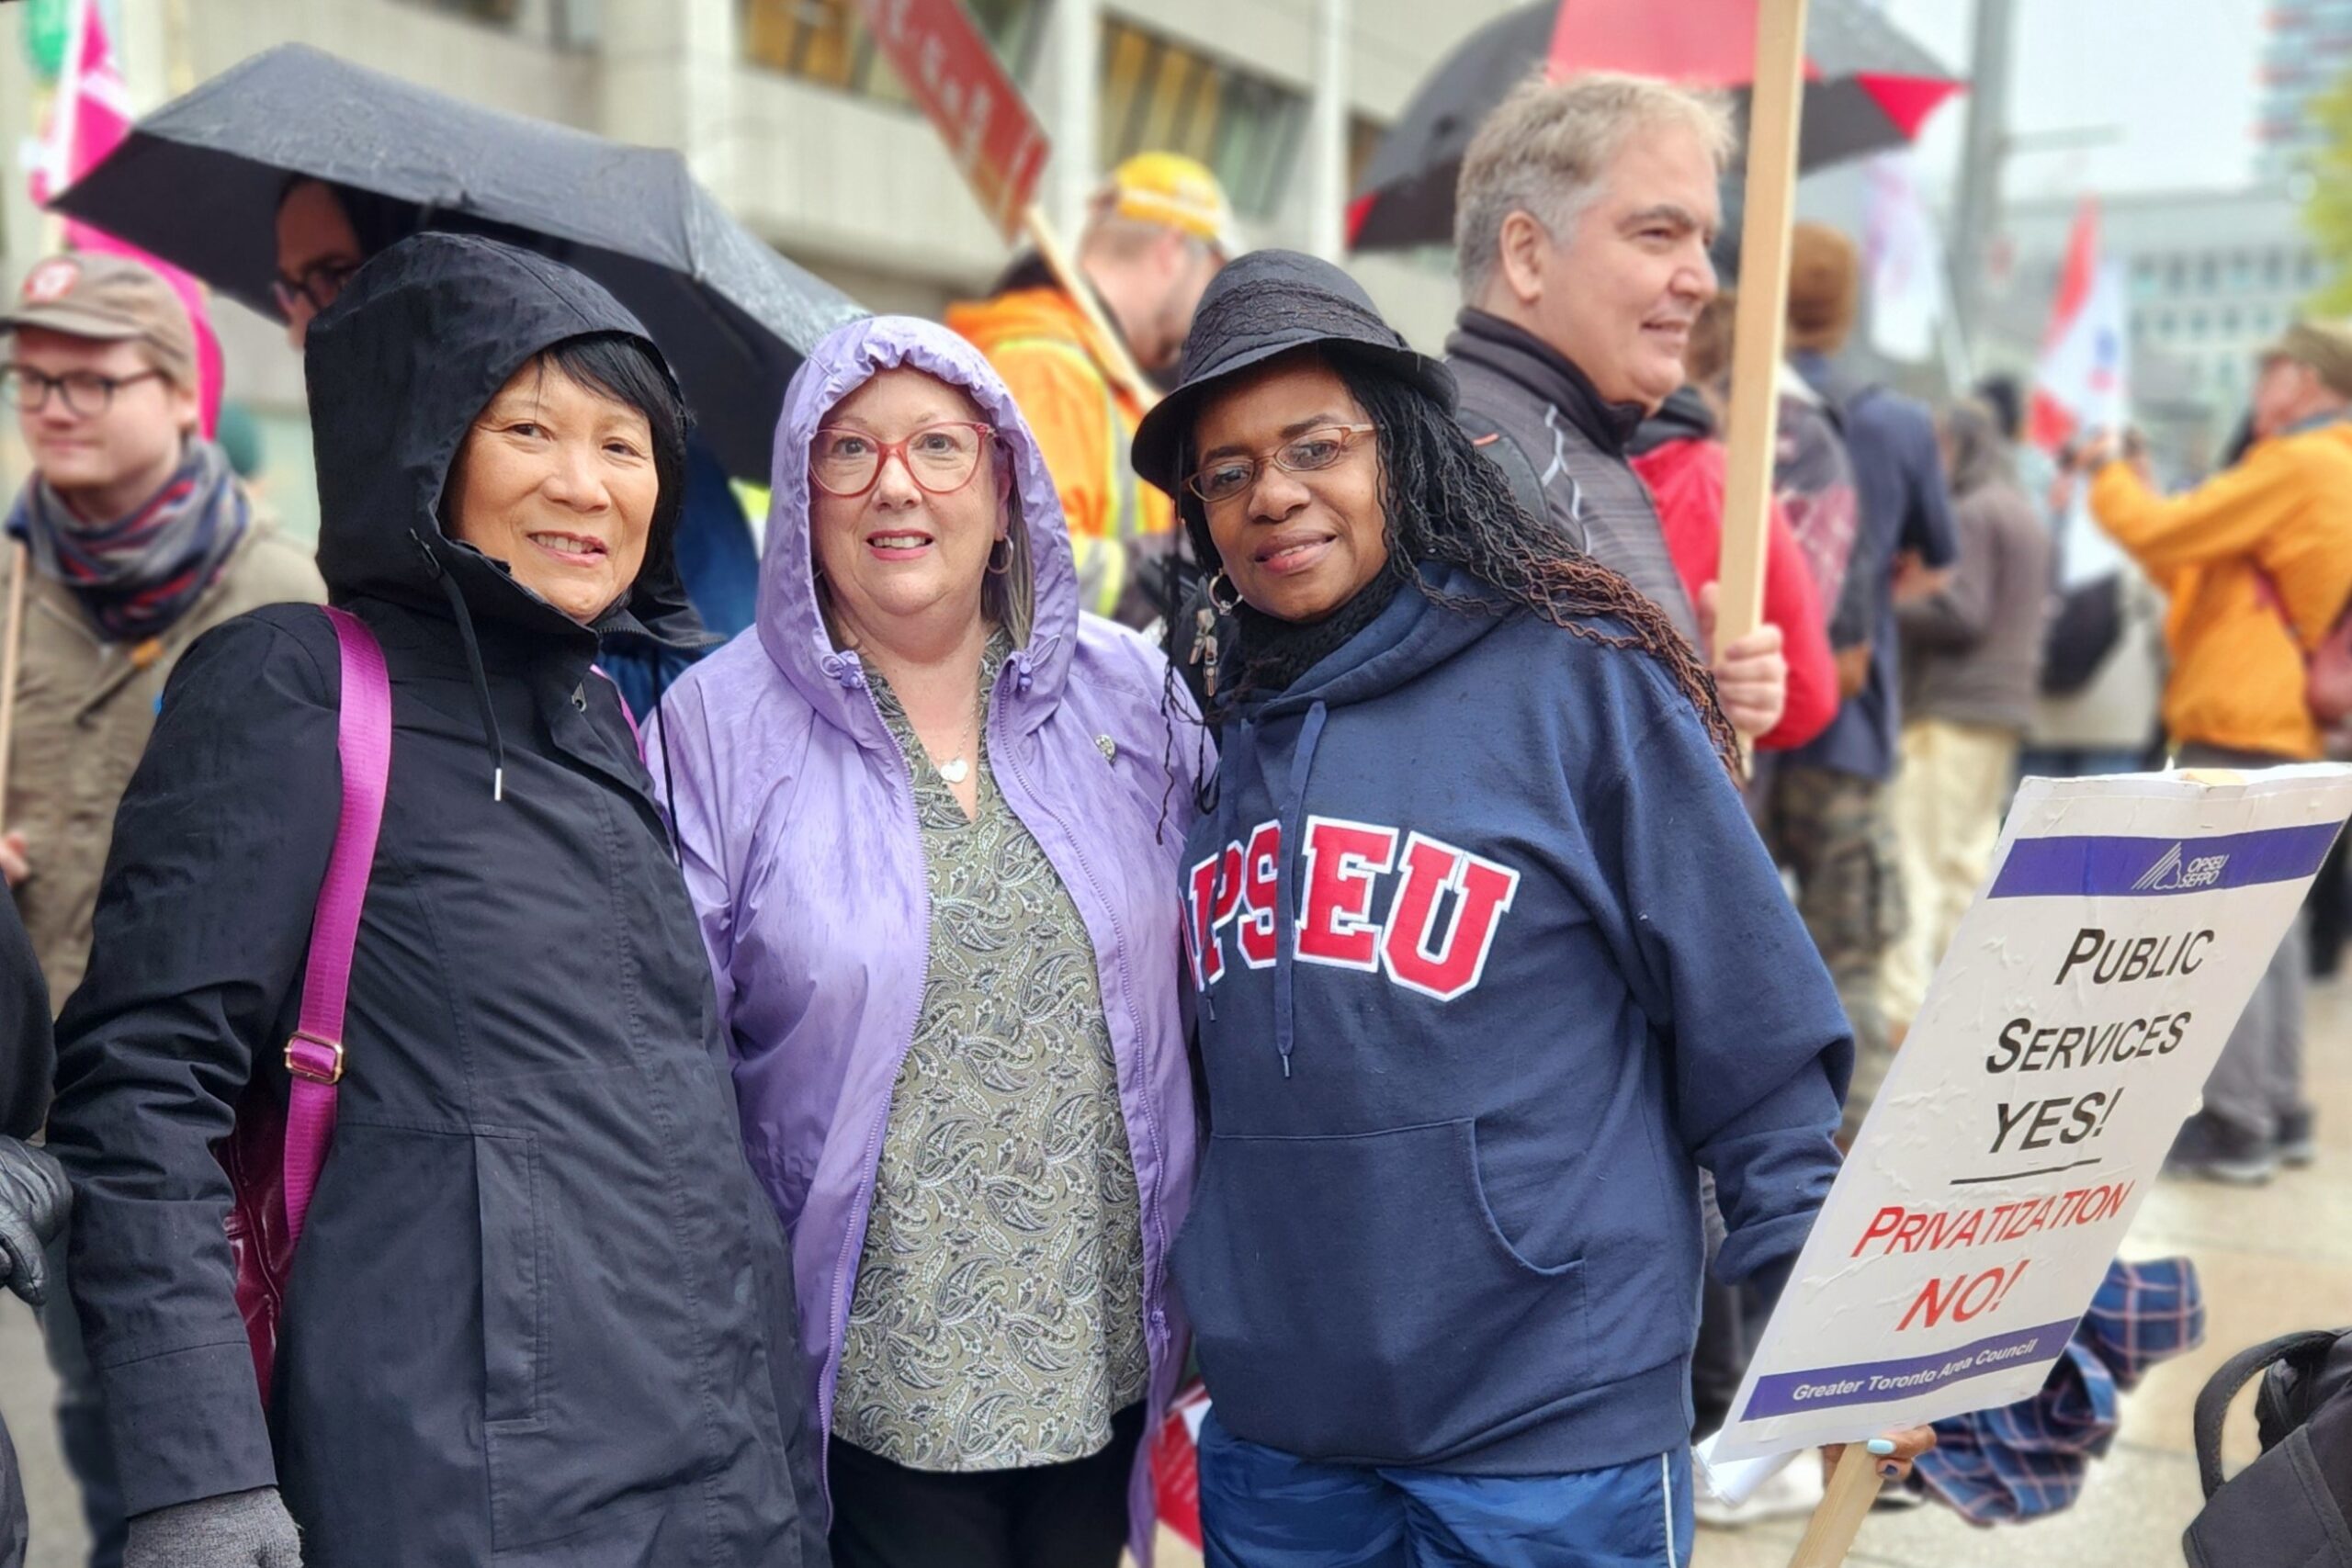 Region 5 RVP Coleen Houlder stands with Olivia Chow and OFL President Patty Coates at 2023 May Day rally in Toronto. Photo by Chandra-Li Paul